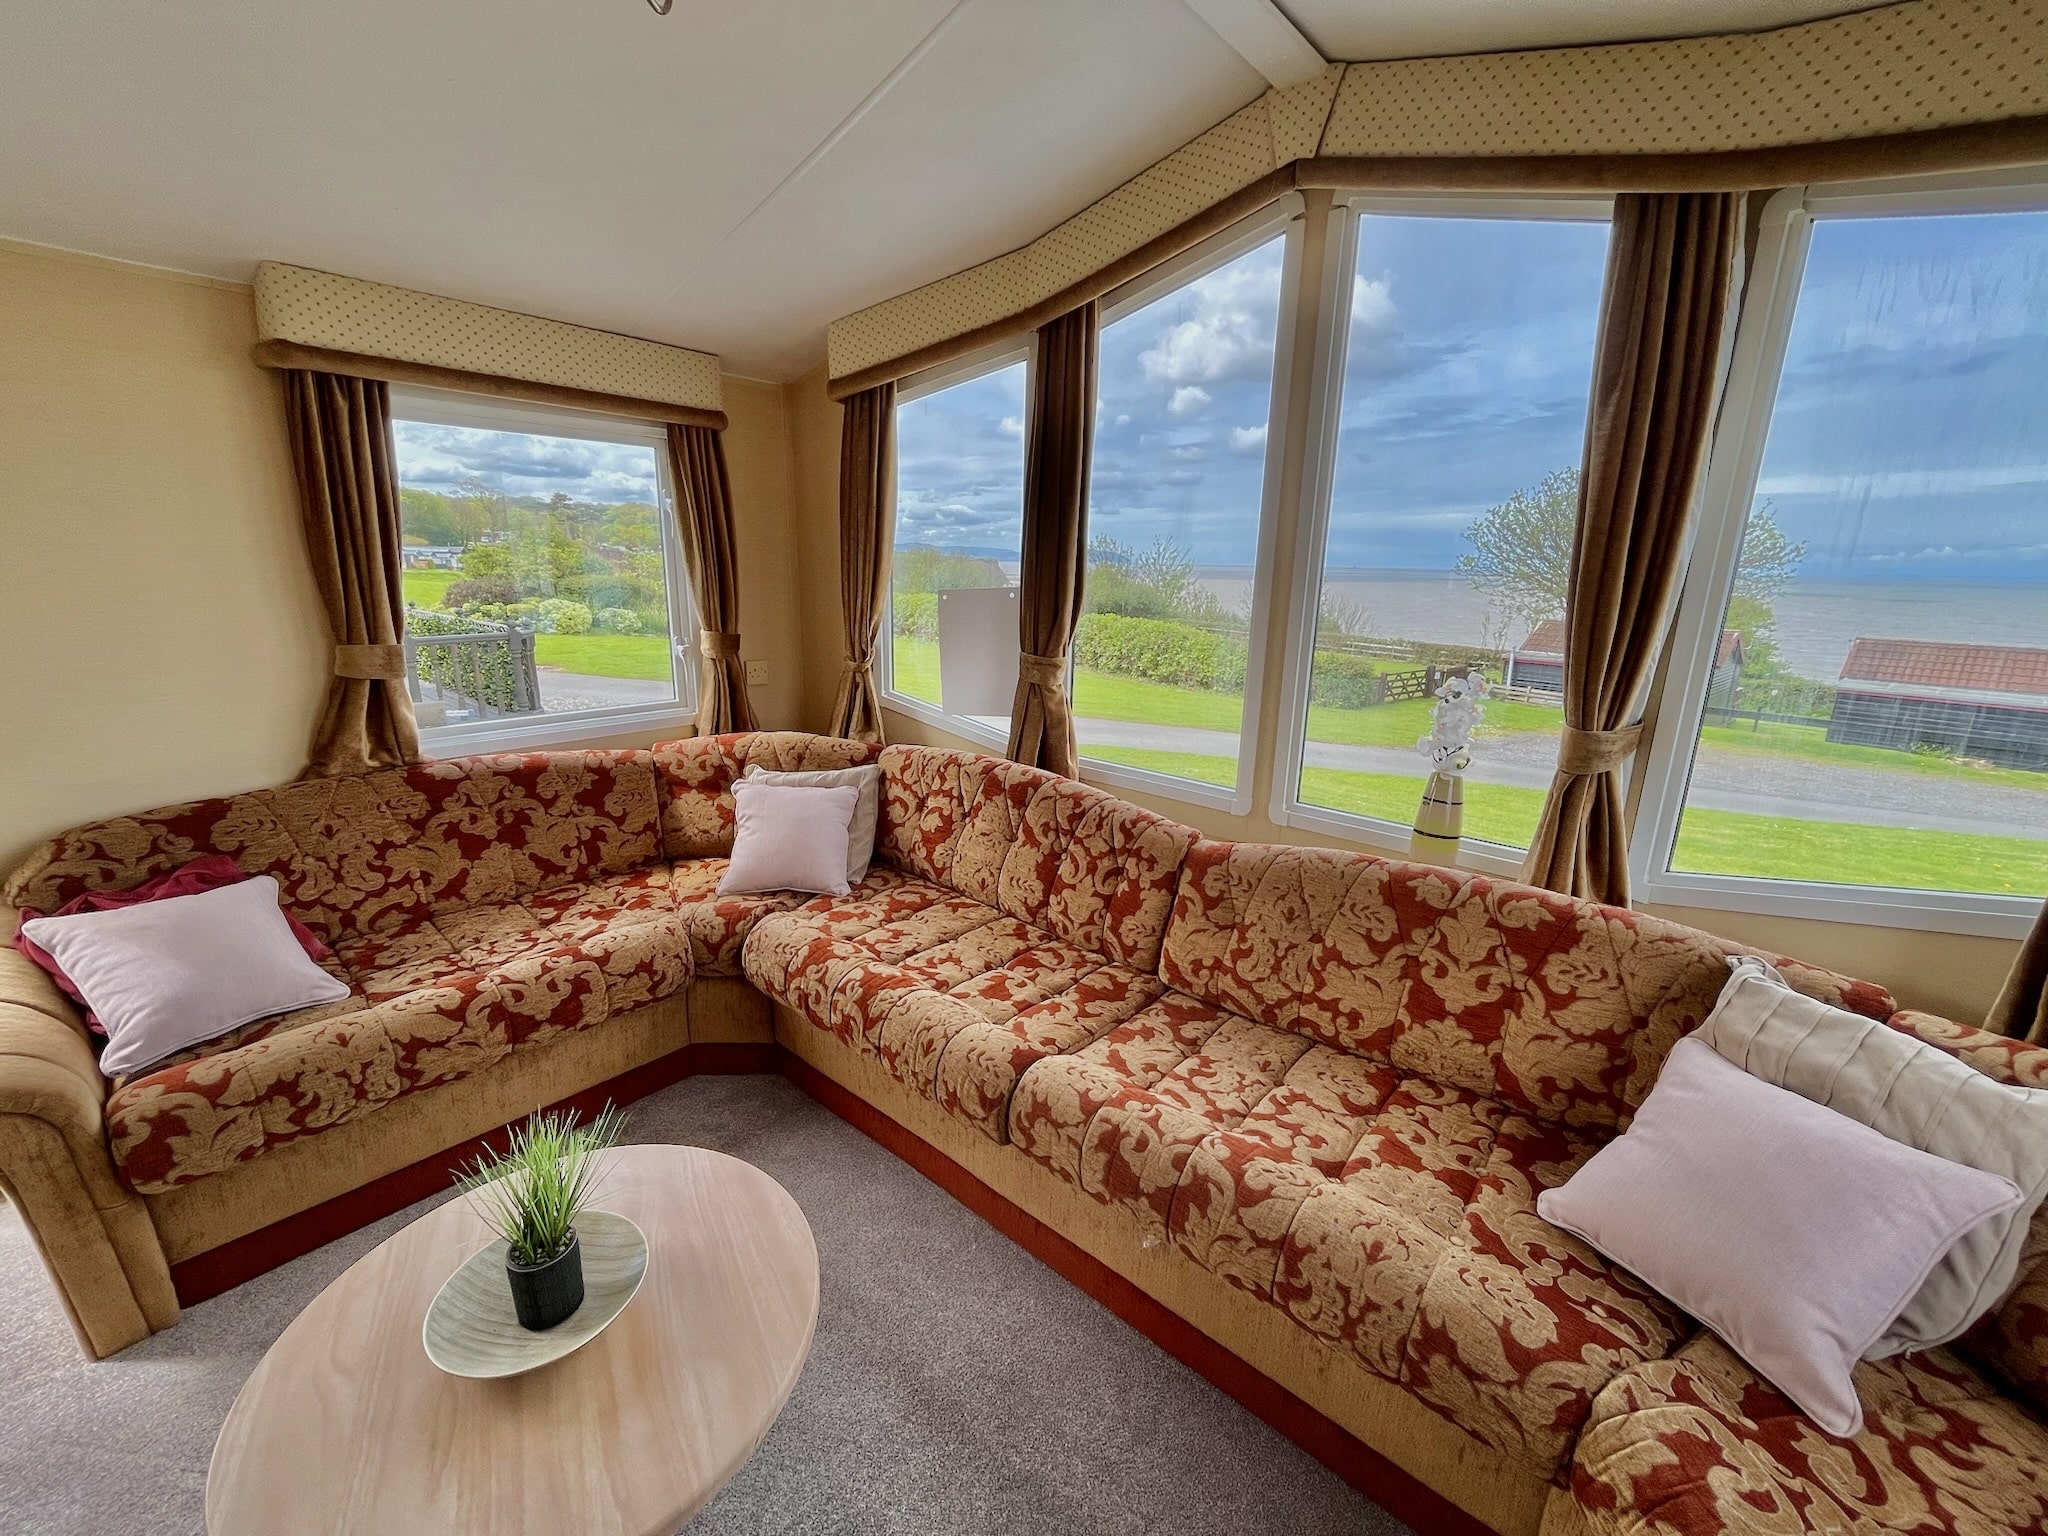 2008 Willerby Leven for sale at St Audries Bay Holiday Club, Somerset